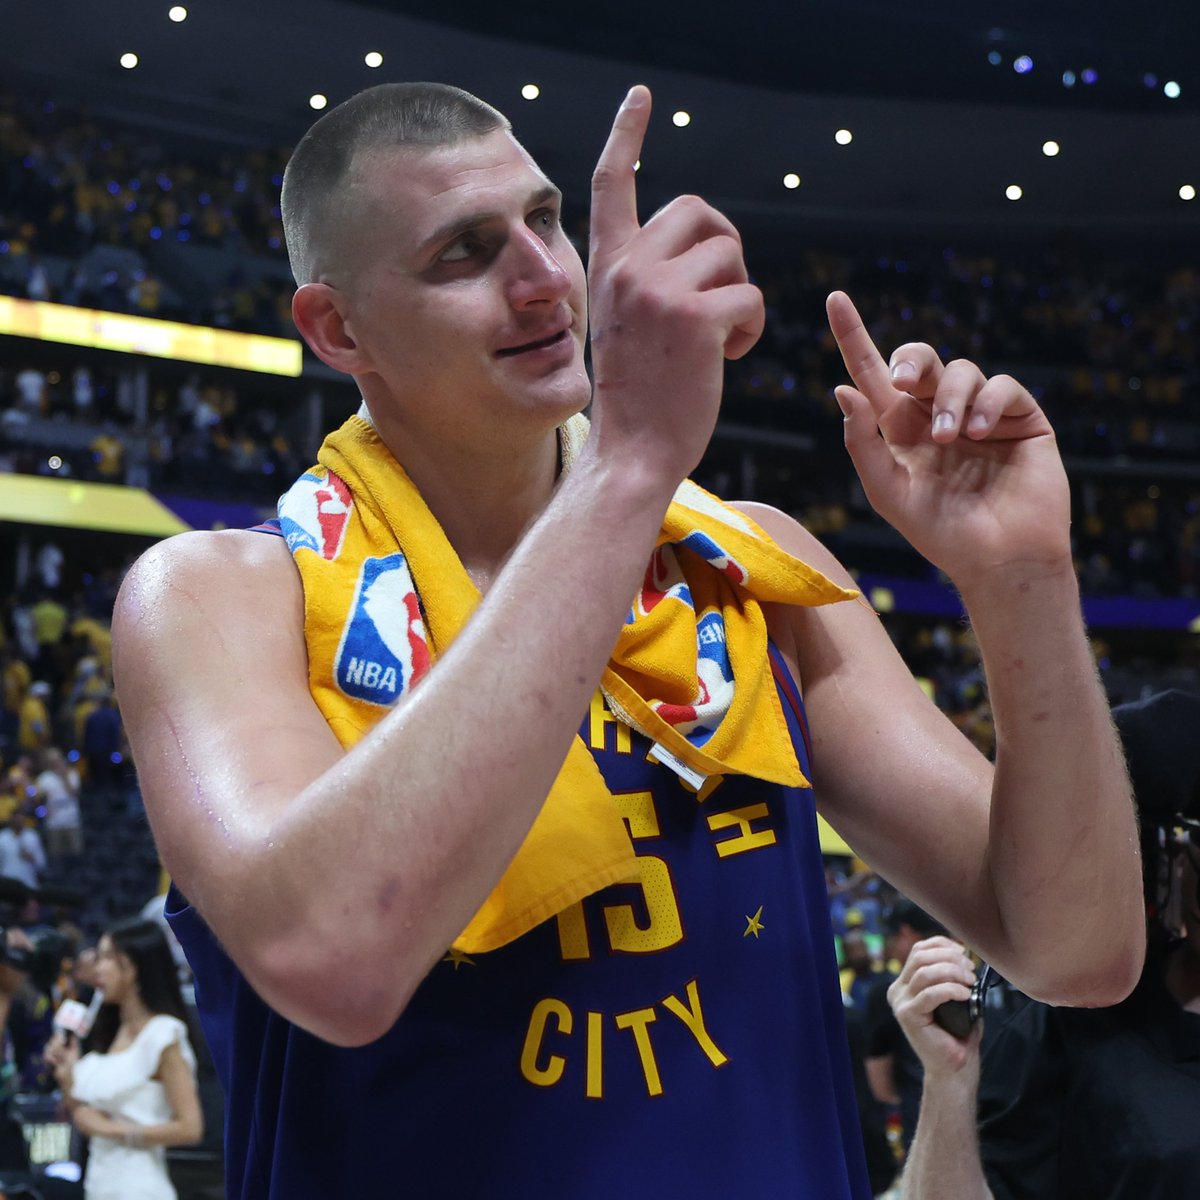 Denver take a 3-2 lead over Minnesota. They trailed 0-2 and can now close out the series in Game 6. 🃏Nikola Jokic goes off scoring 40 points and 13 assists (0 turnovers). #NBAPlayoffs #Road2Gold